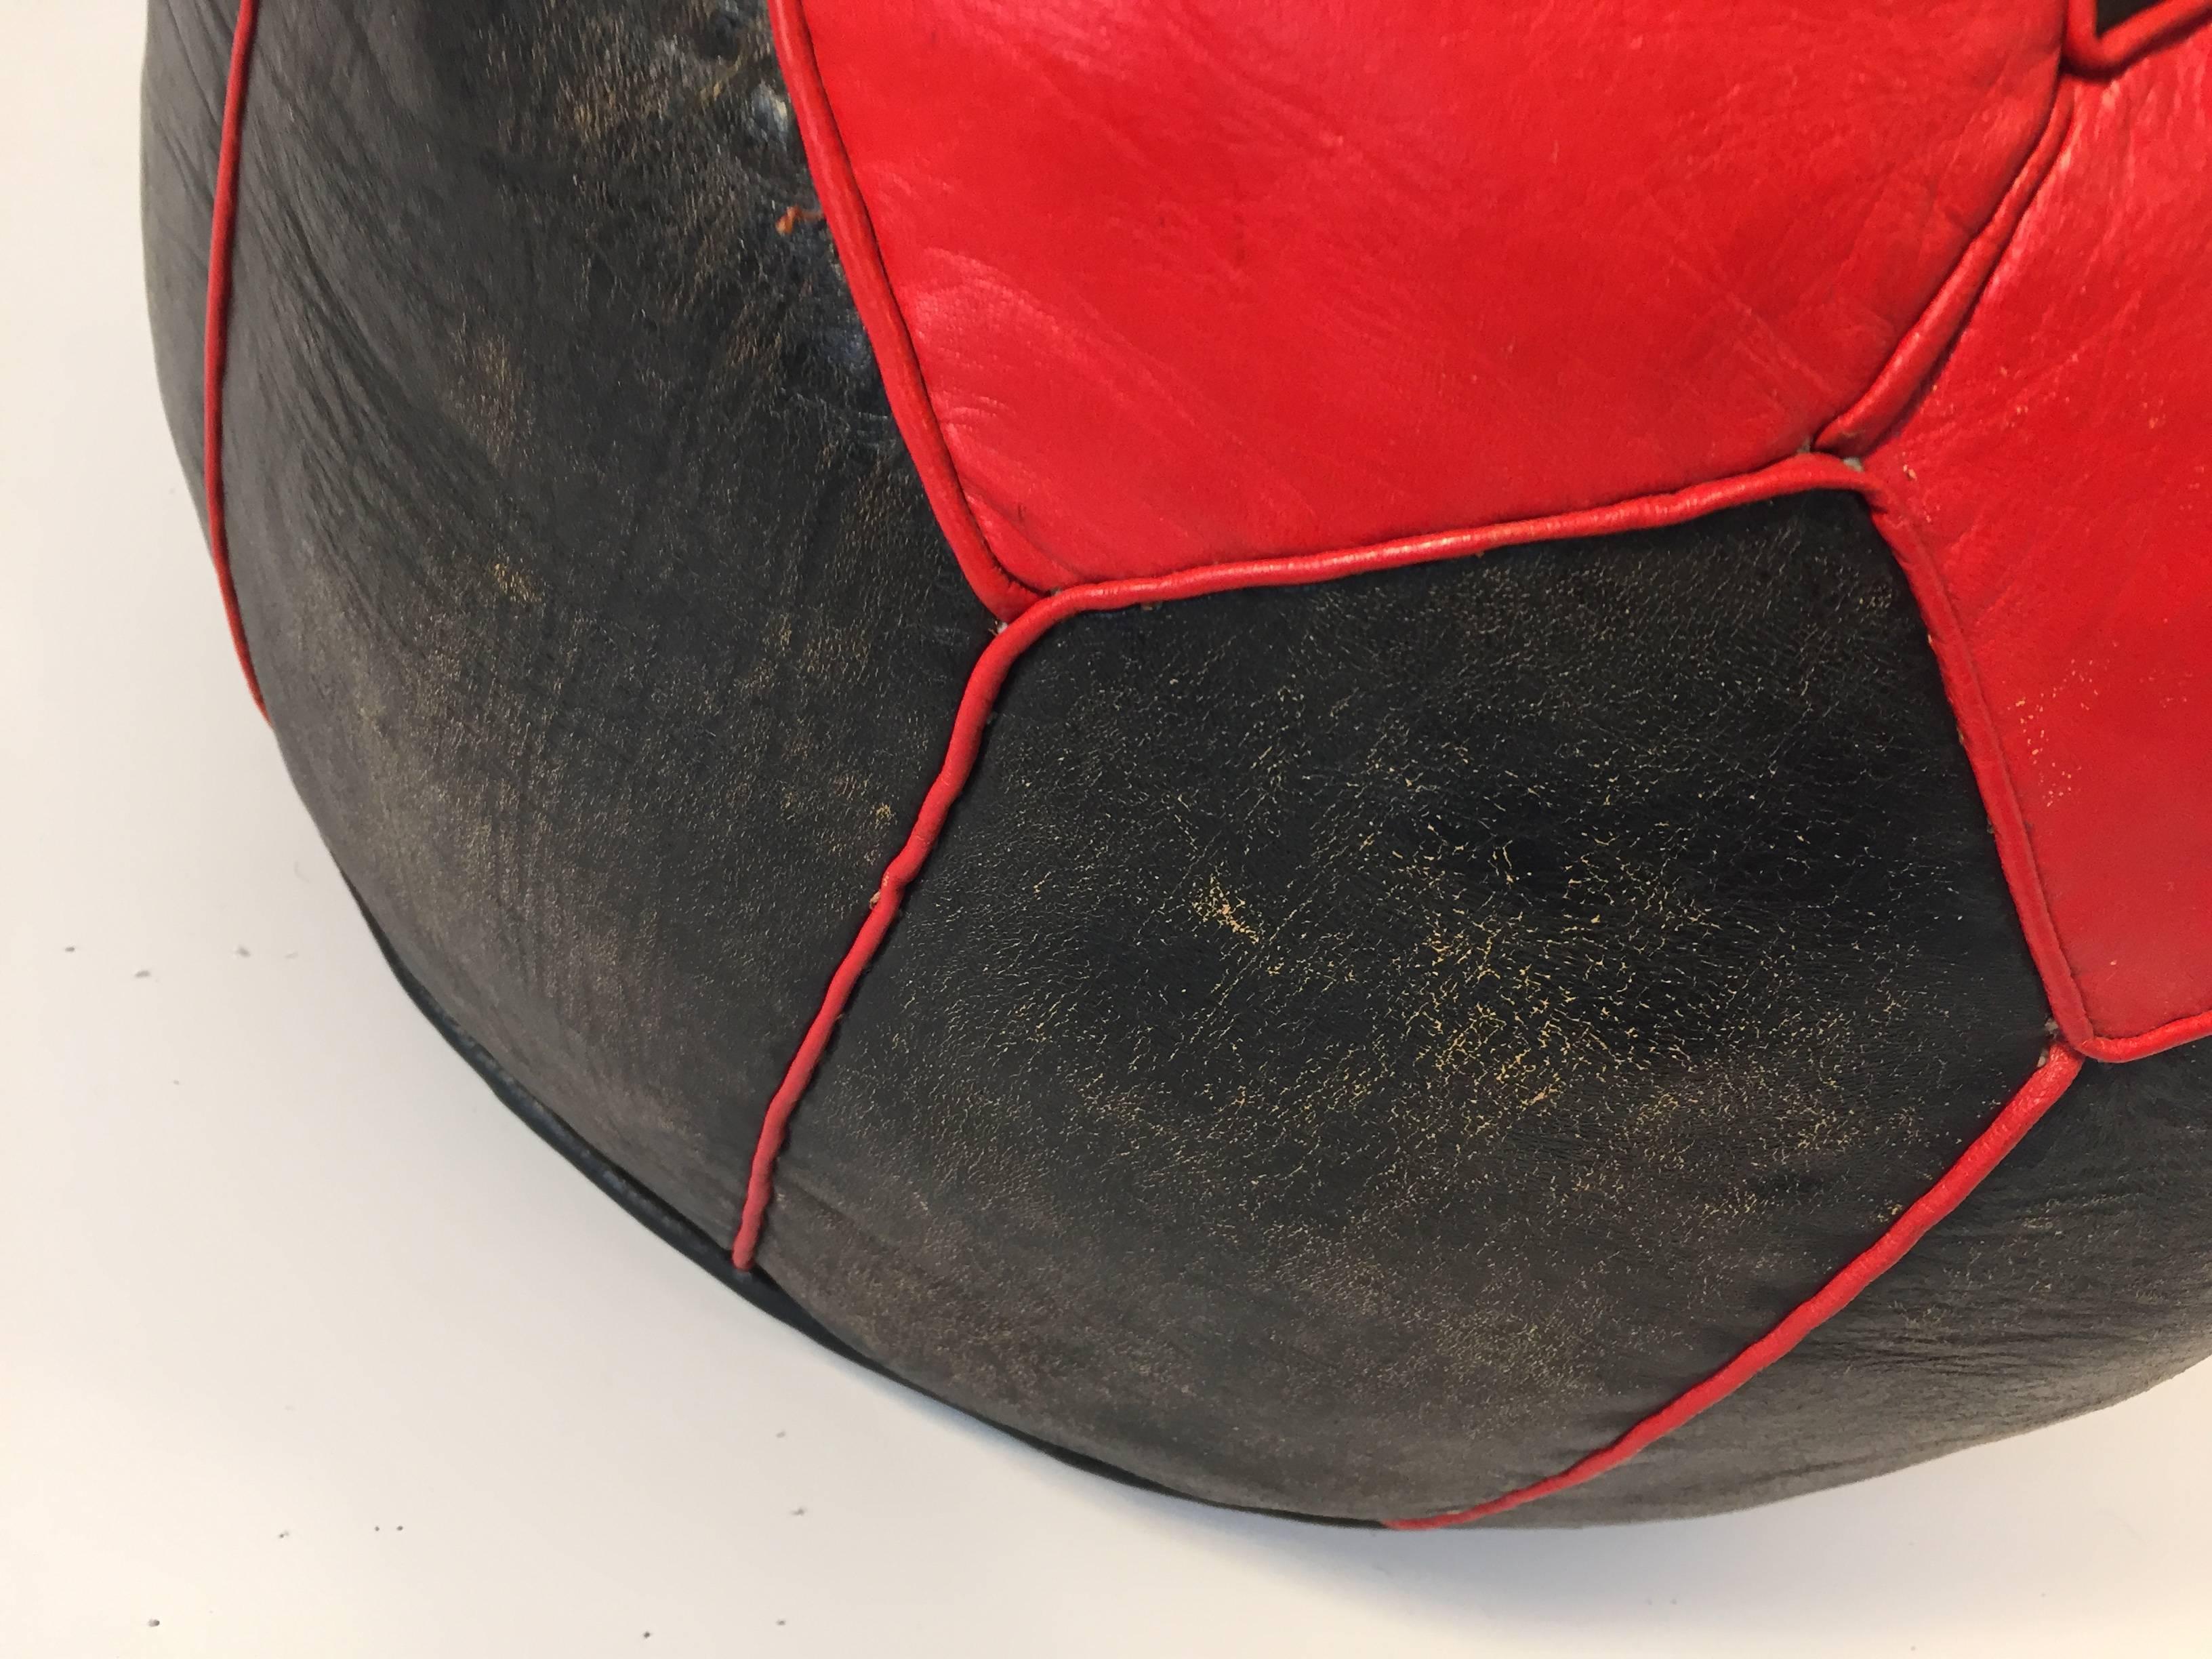 Moroccan Vintage Round Leather Pouf Red and Black (20. Jahrhundert)